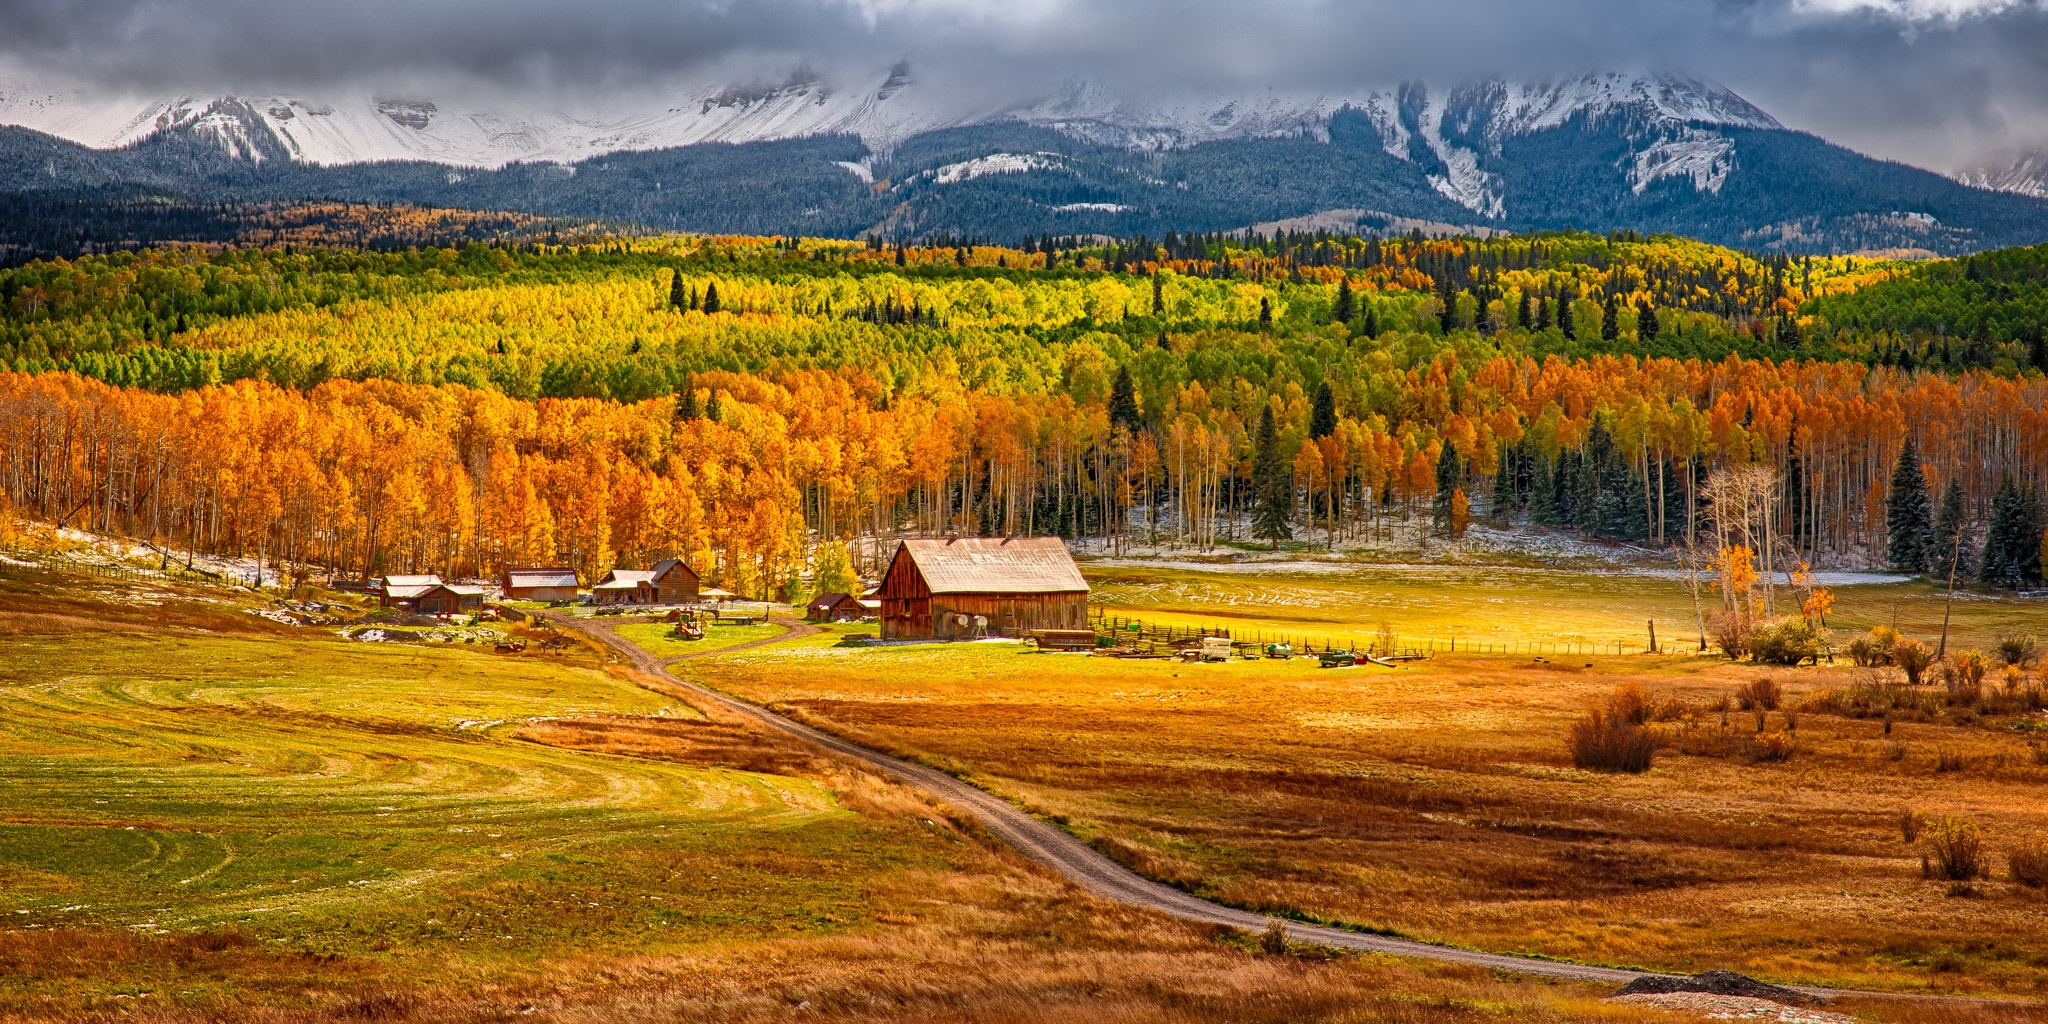 The Schmidt Ranch, a Colorado Centennial farm sourrounded by brilliant autumn aspens and snow-capped mountains, is on Wilson Mesa off Silver Pick Road near Telluride, Colorado.